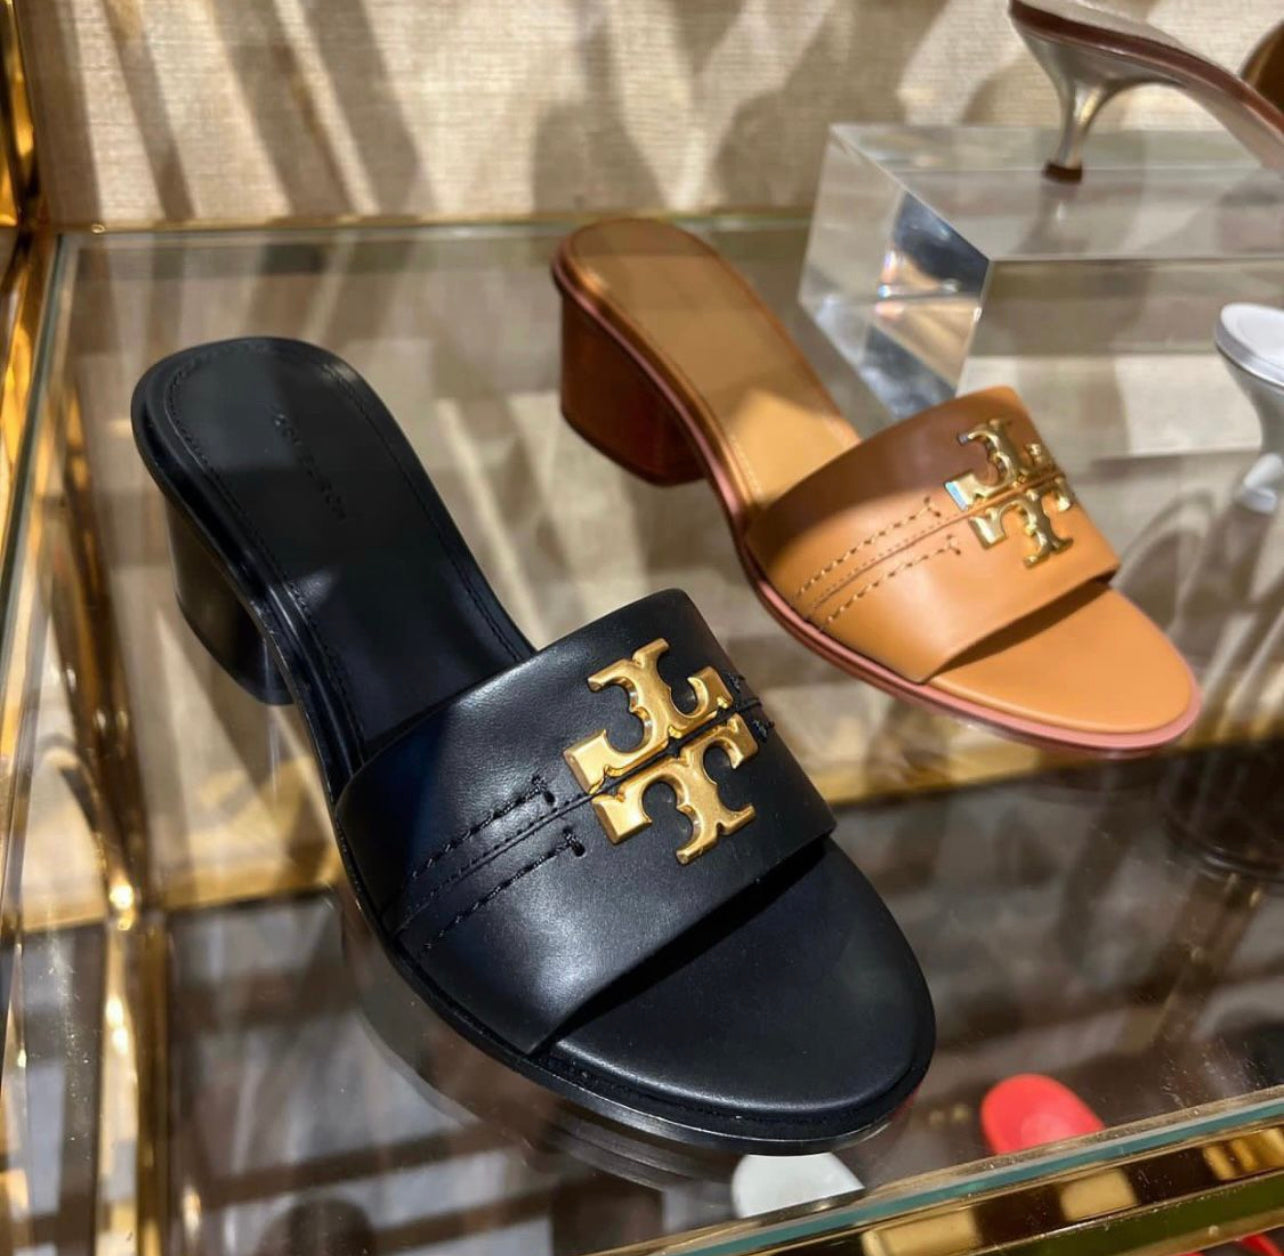 Tory burch outlet everly sandal｜TikTok Search